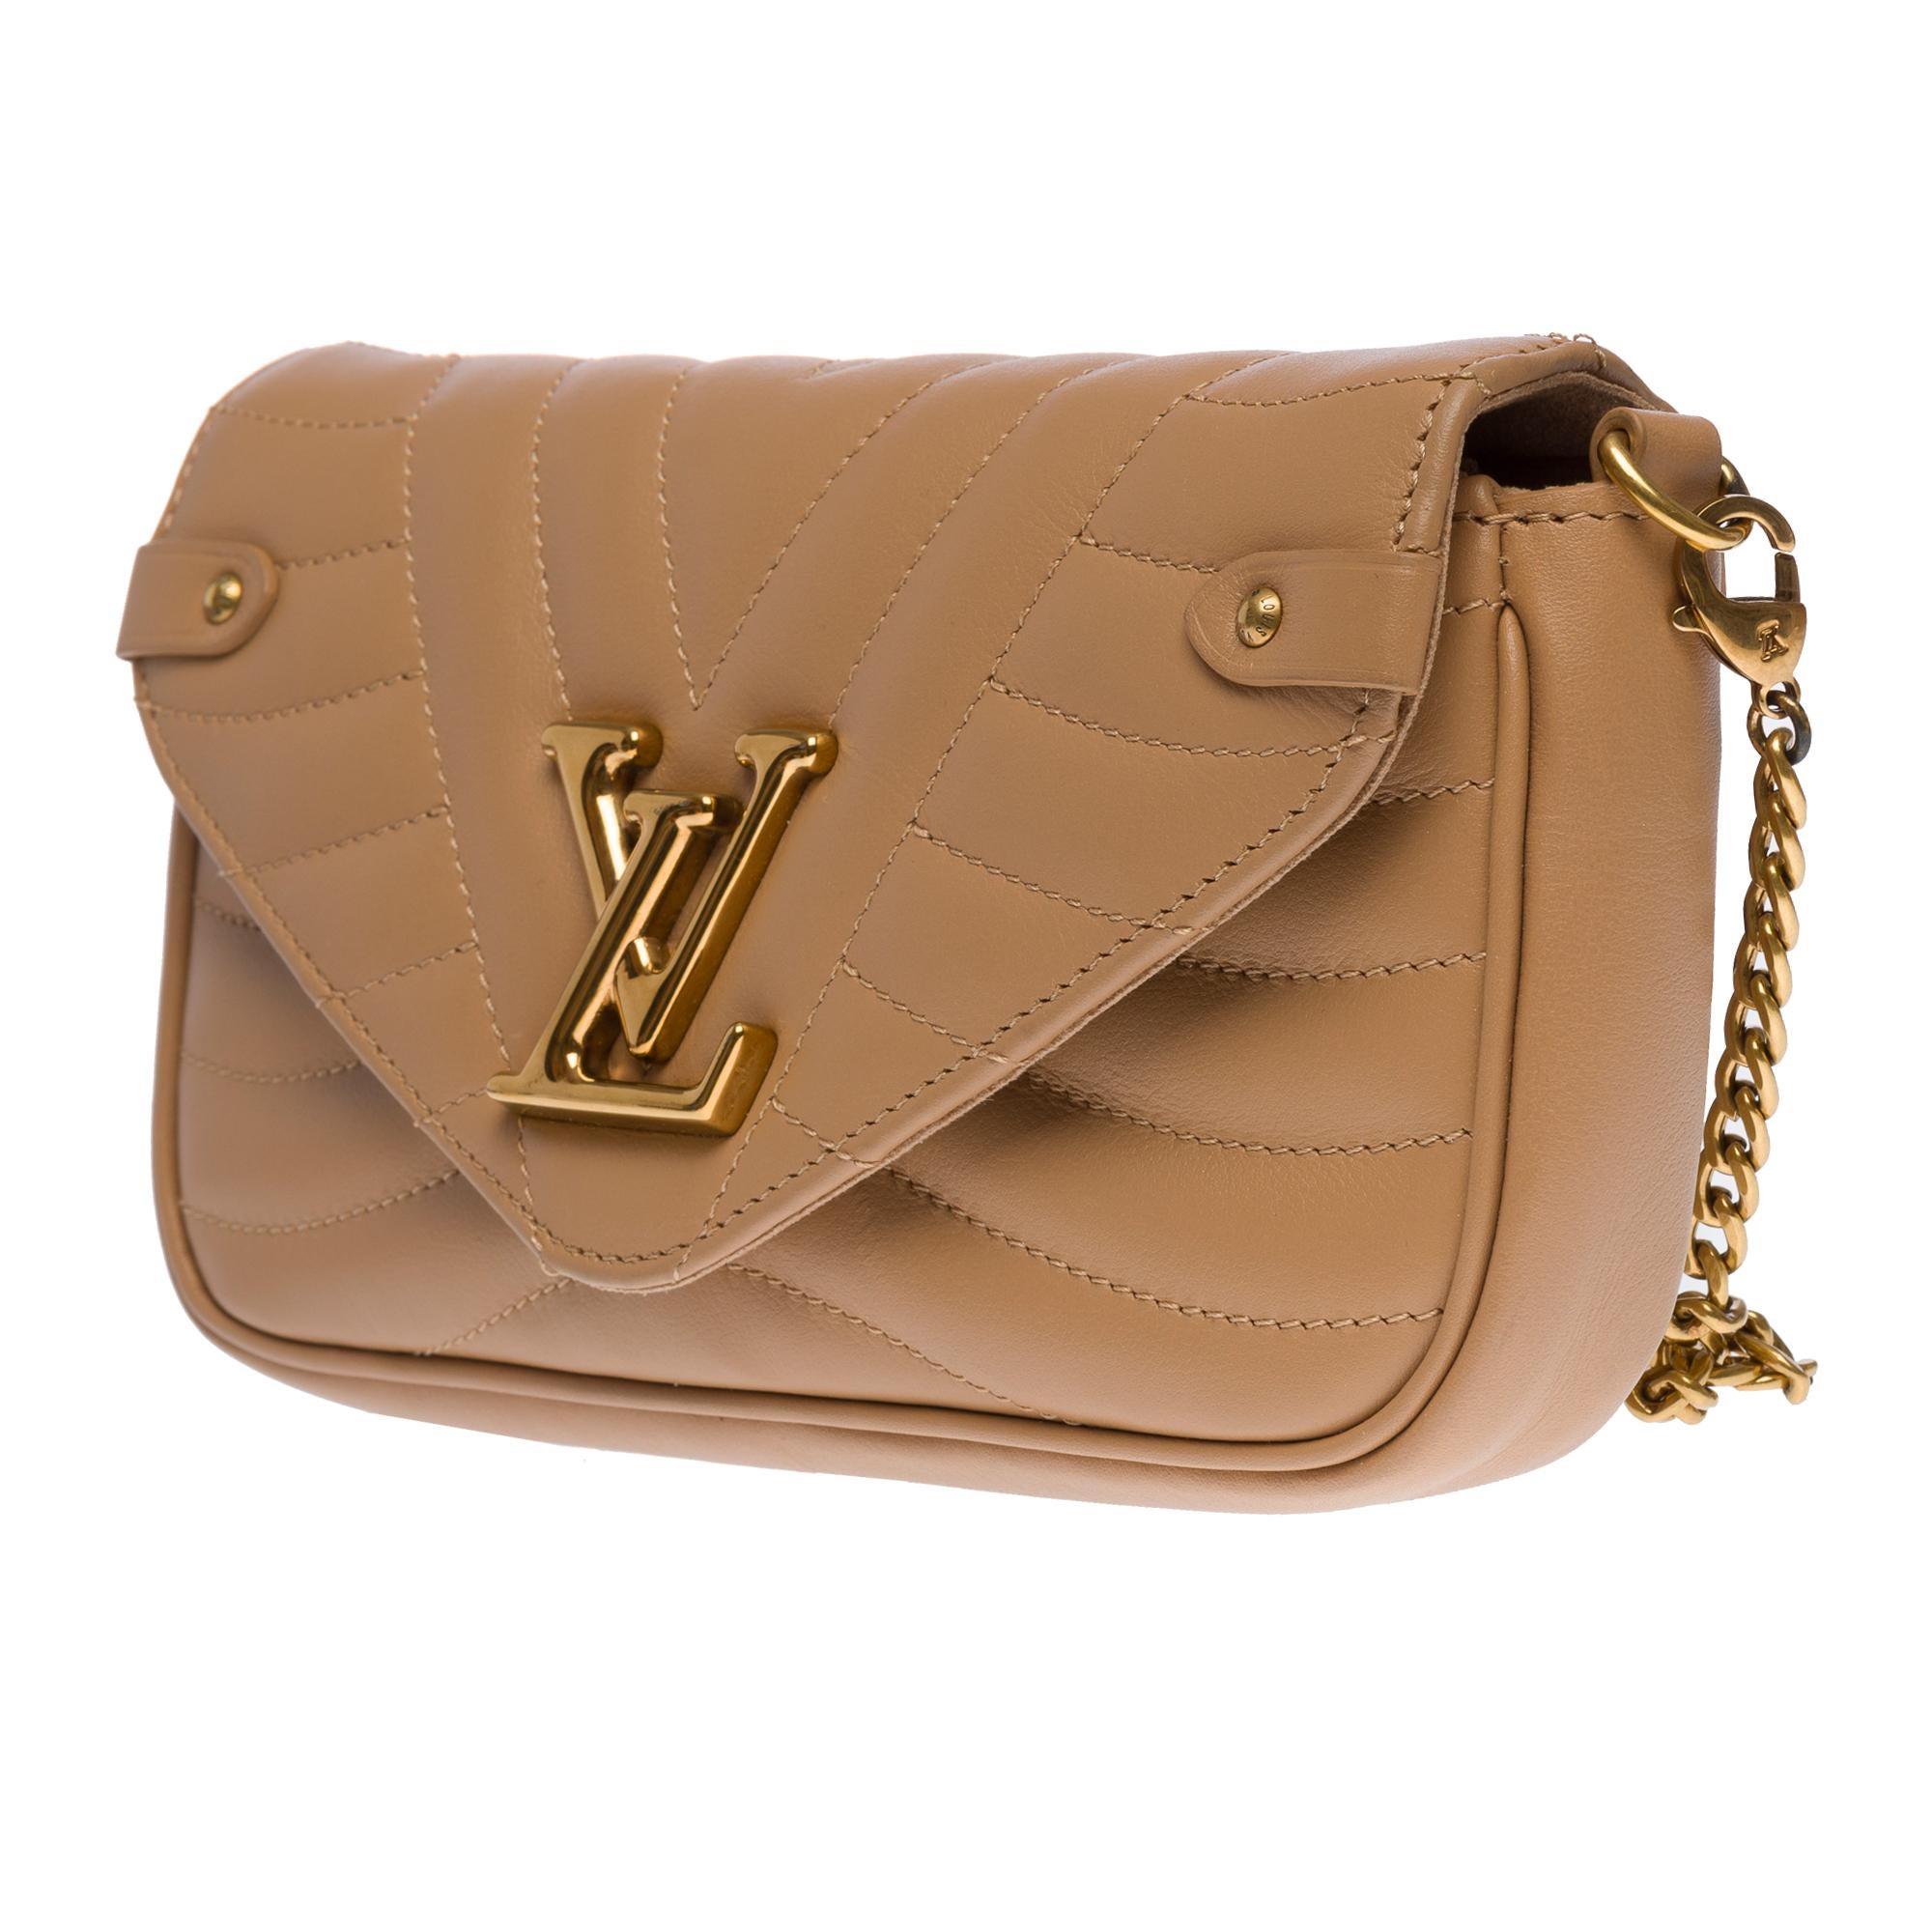 Women's or Men's Louis Vuitton New Wave shoulder bag in hazelnut quilted calf leather, GHW